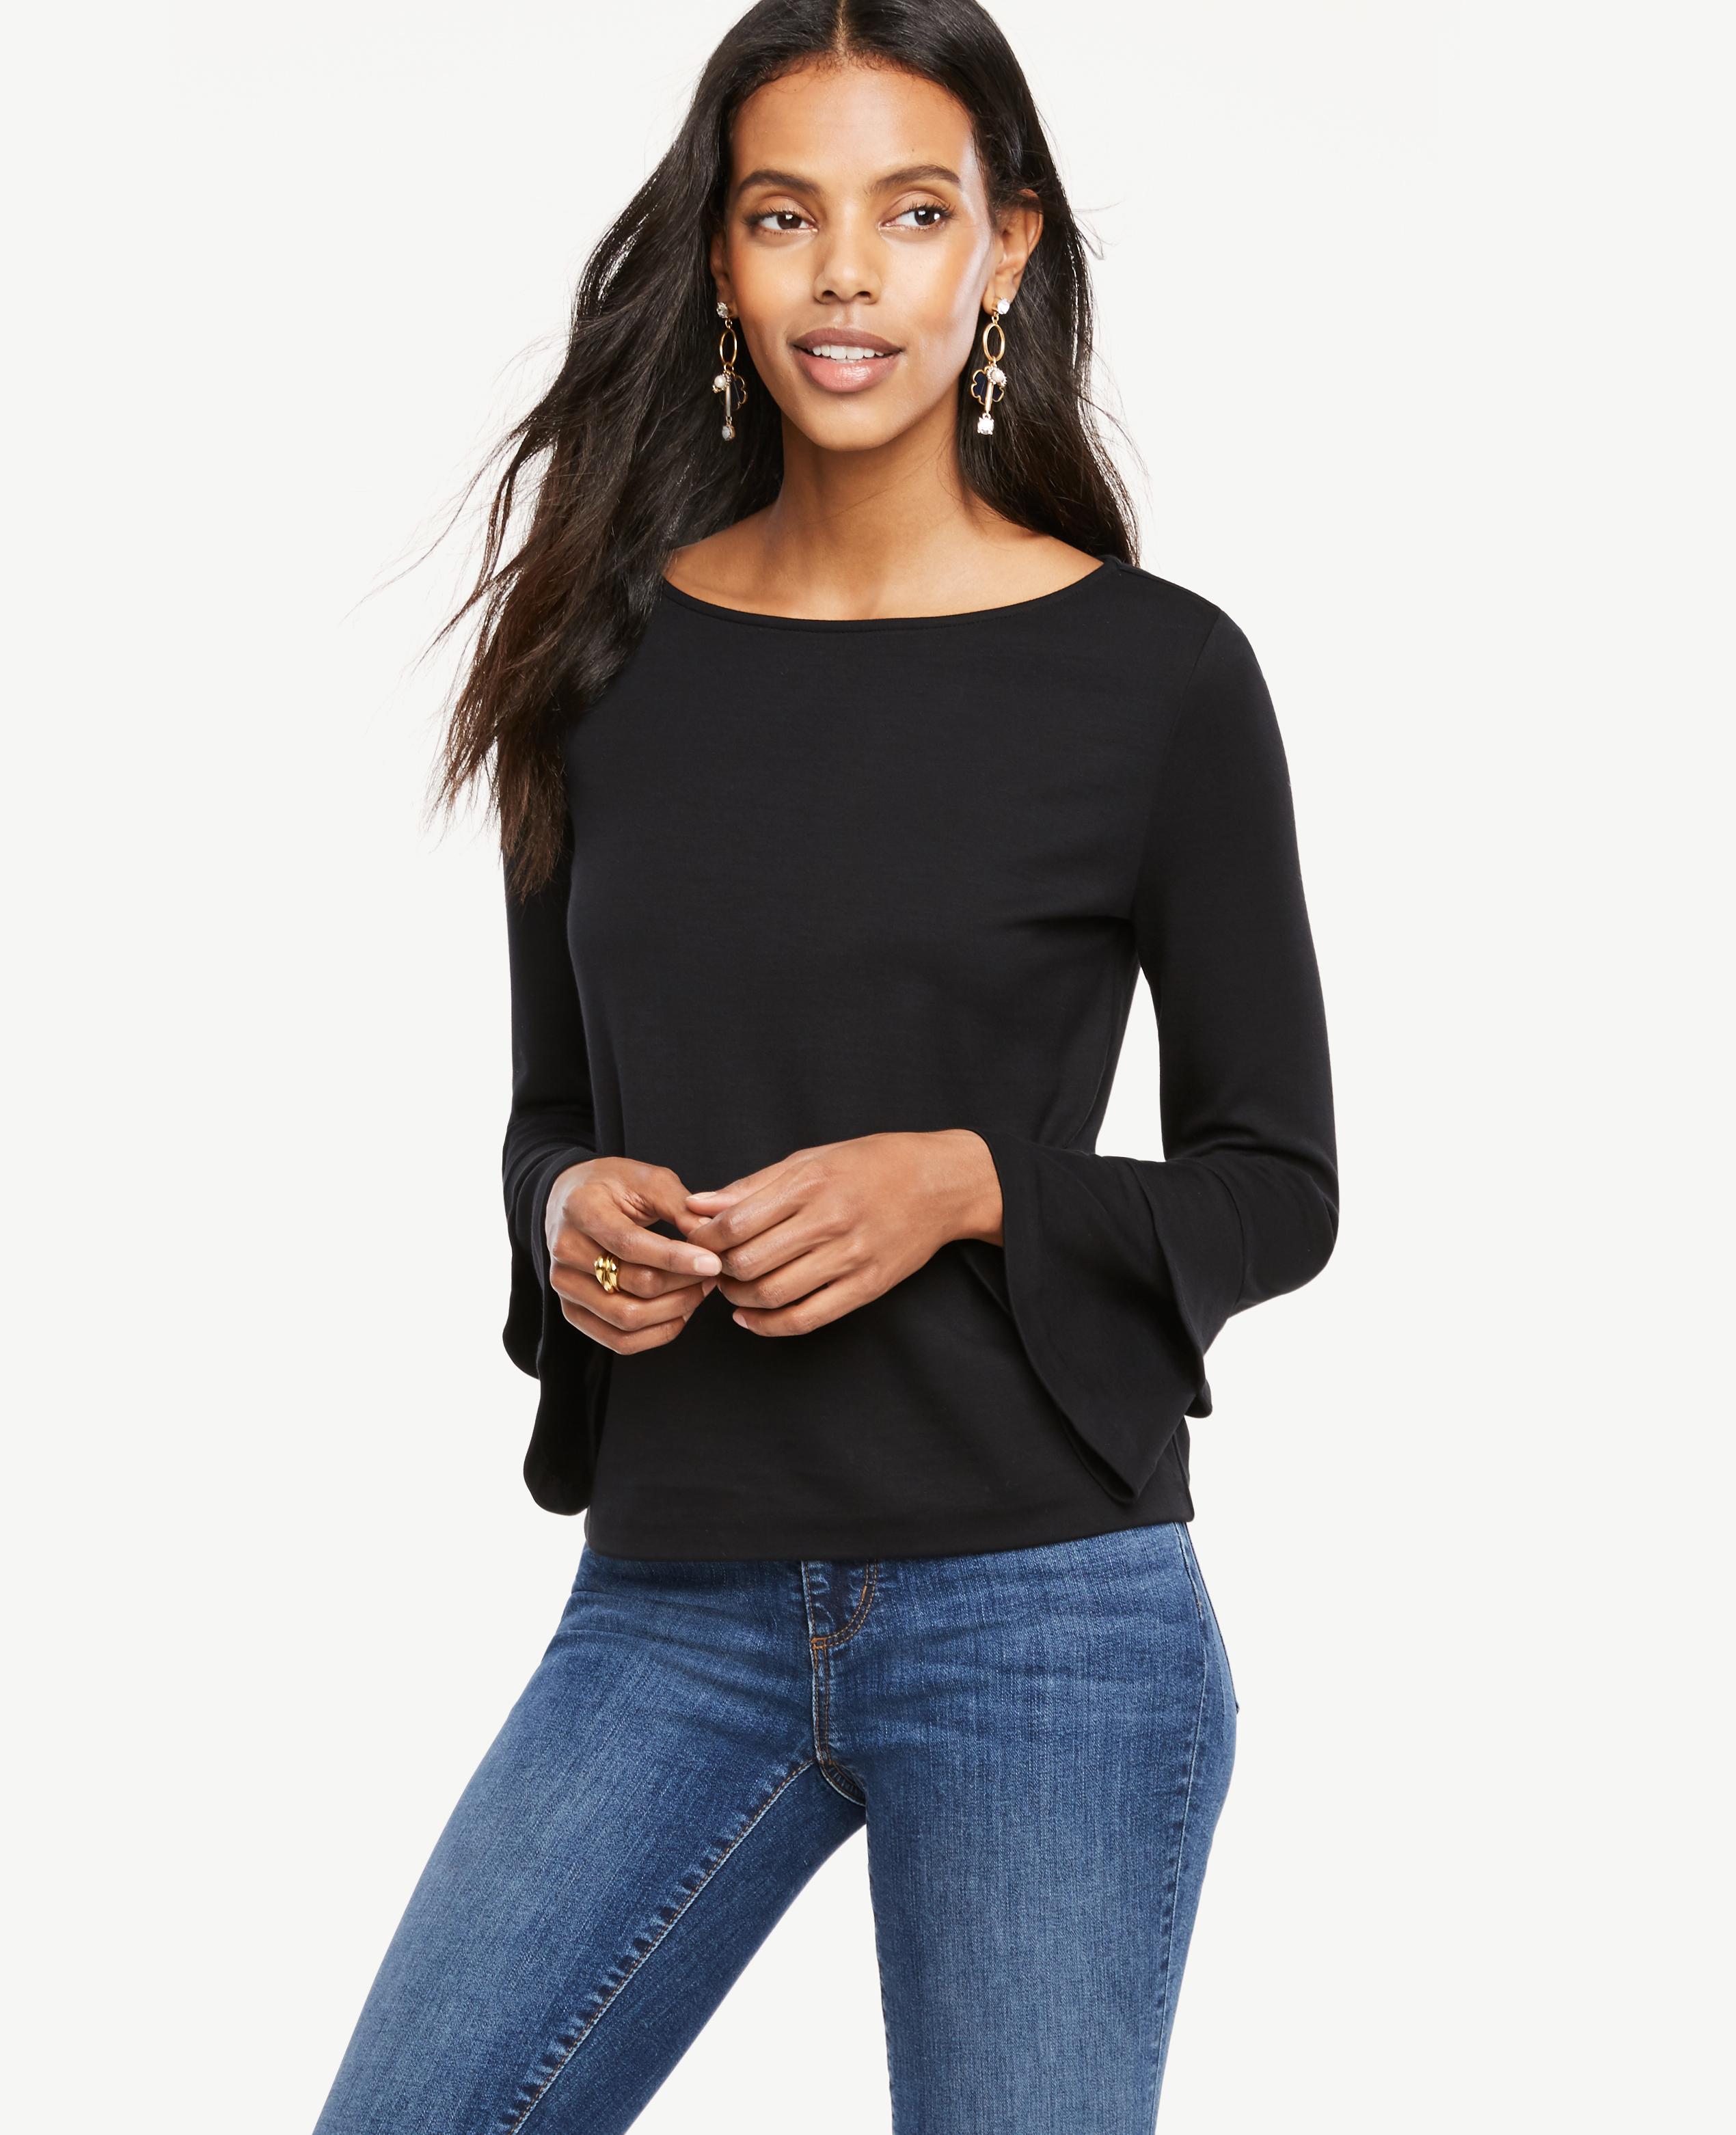 Lyst - Ann Taylor Petite Double Flare Sleeve Top in Black